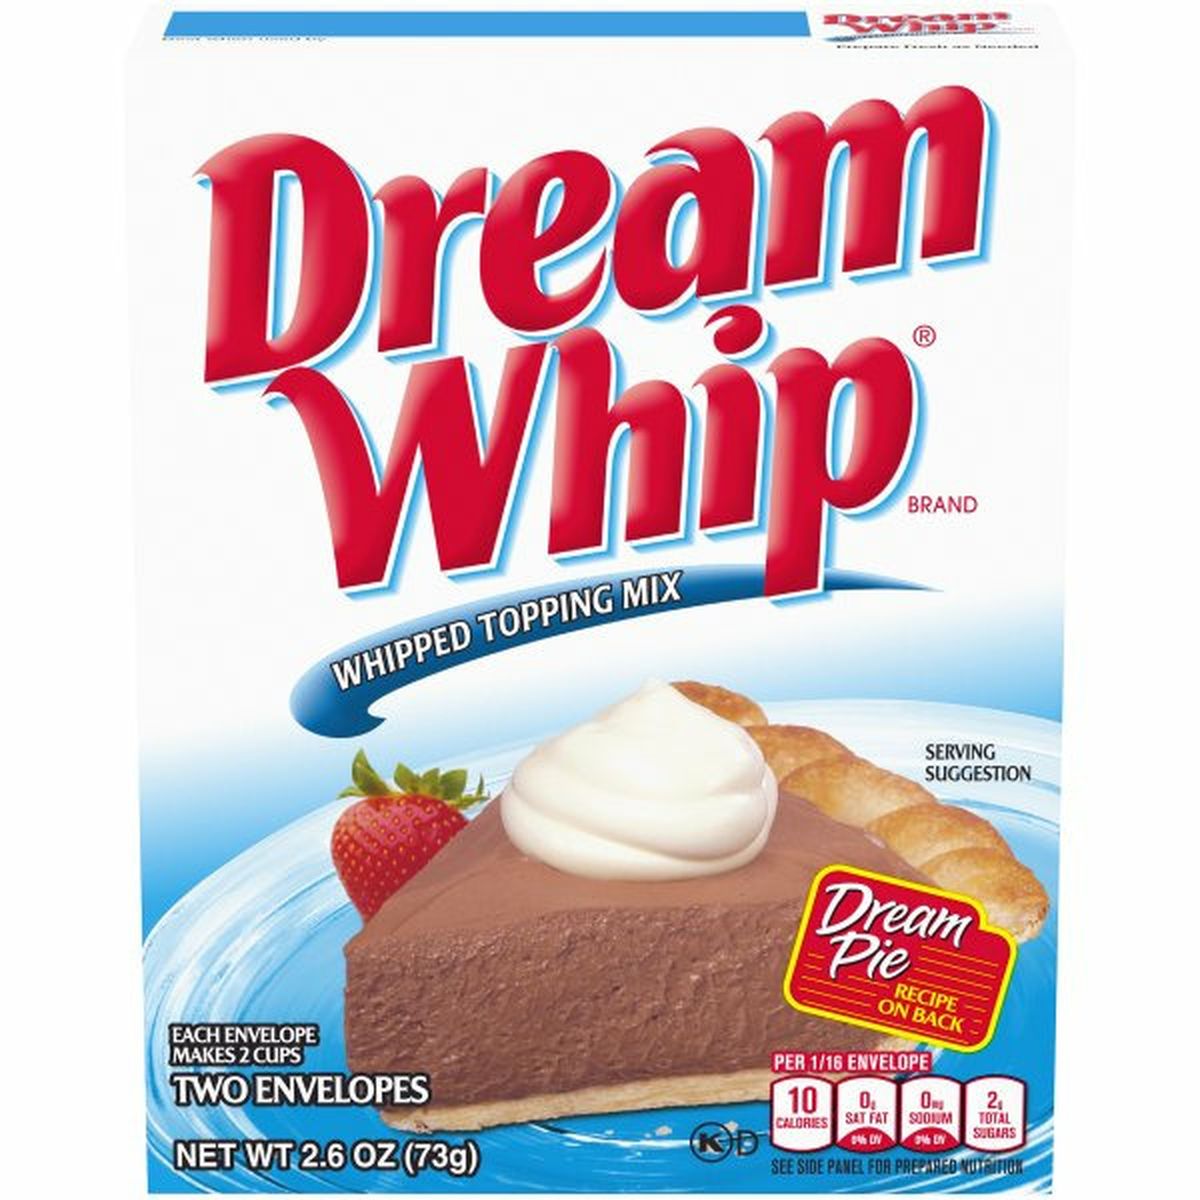 Calories in Dream Whip Whipped Topping Mix